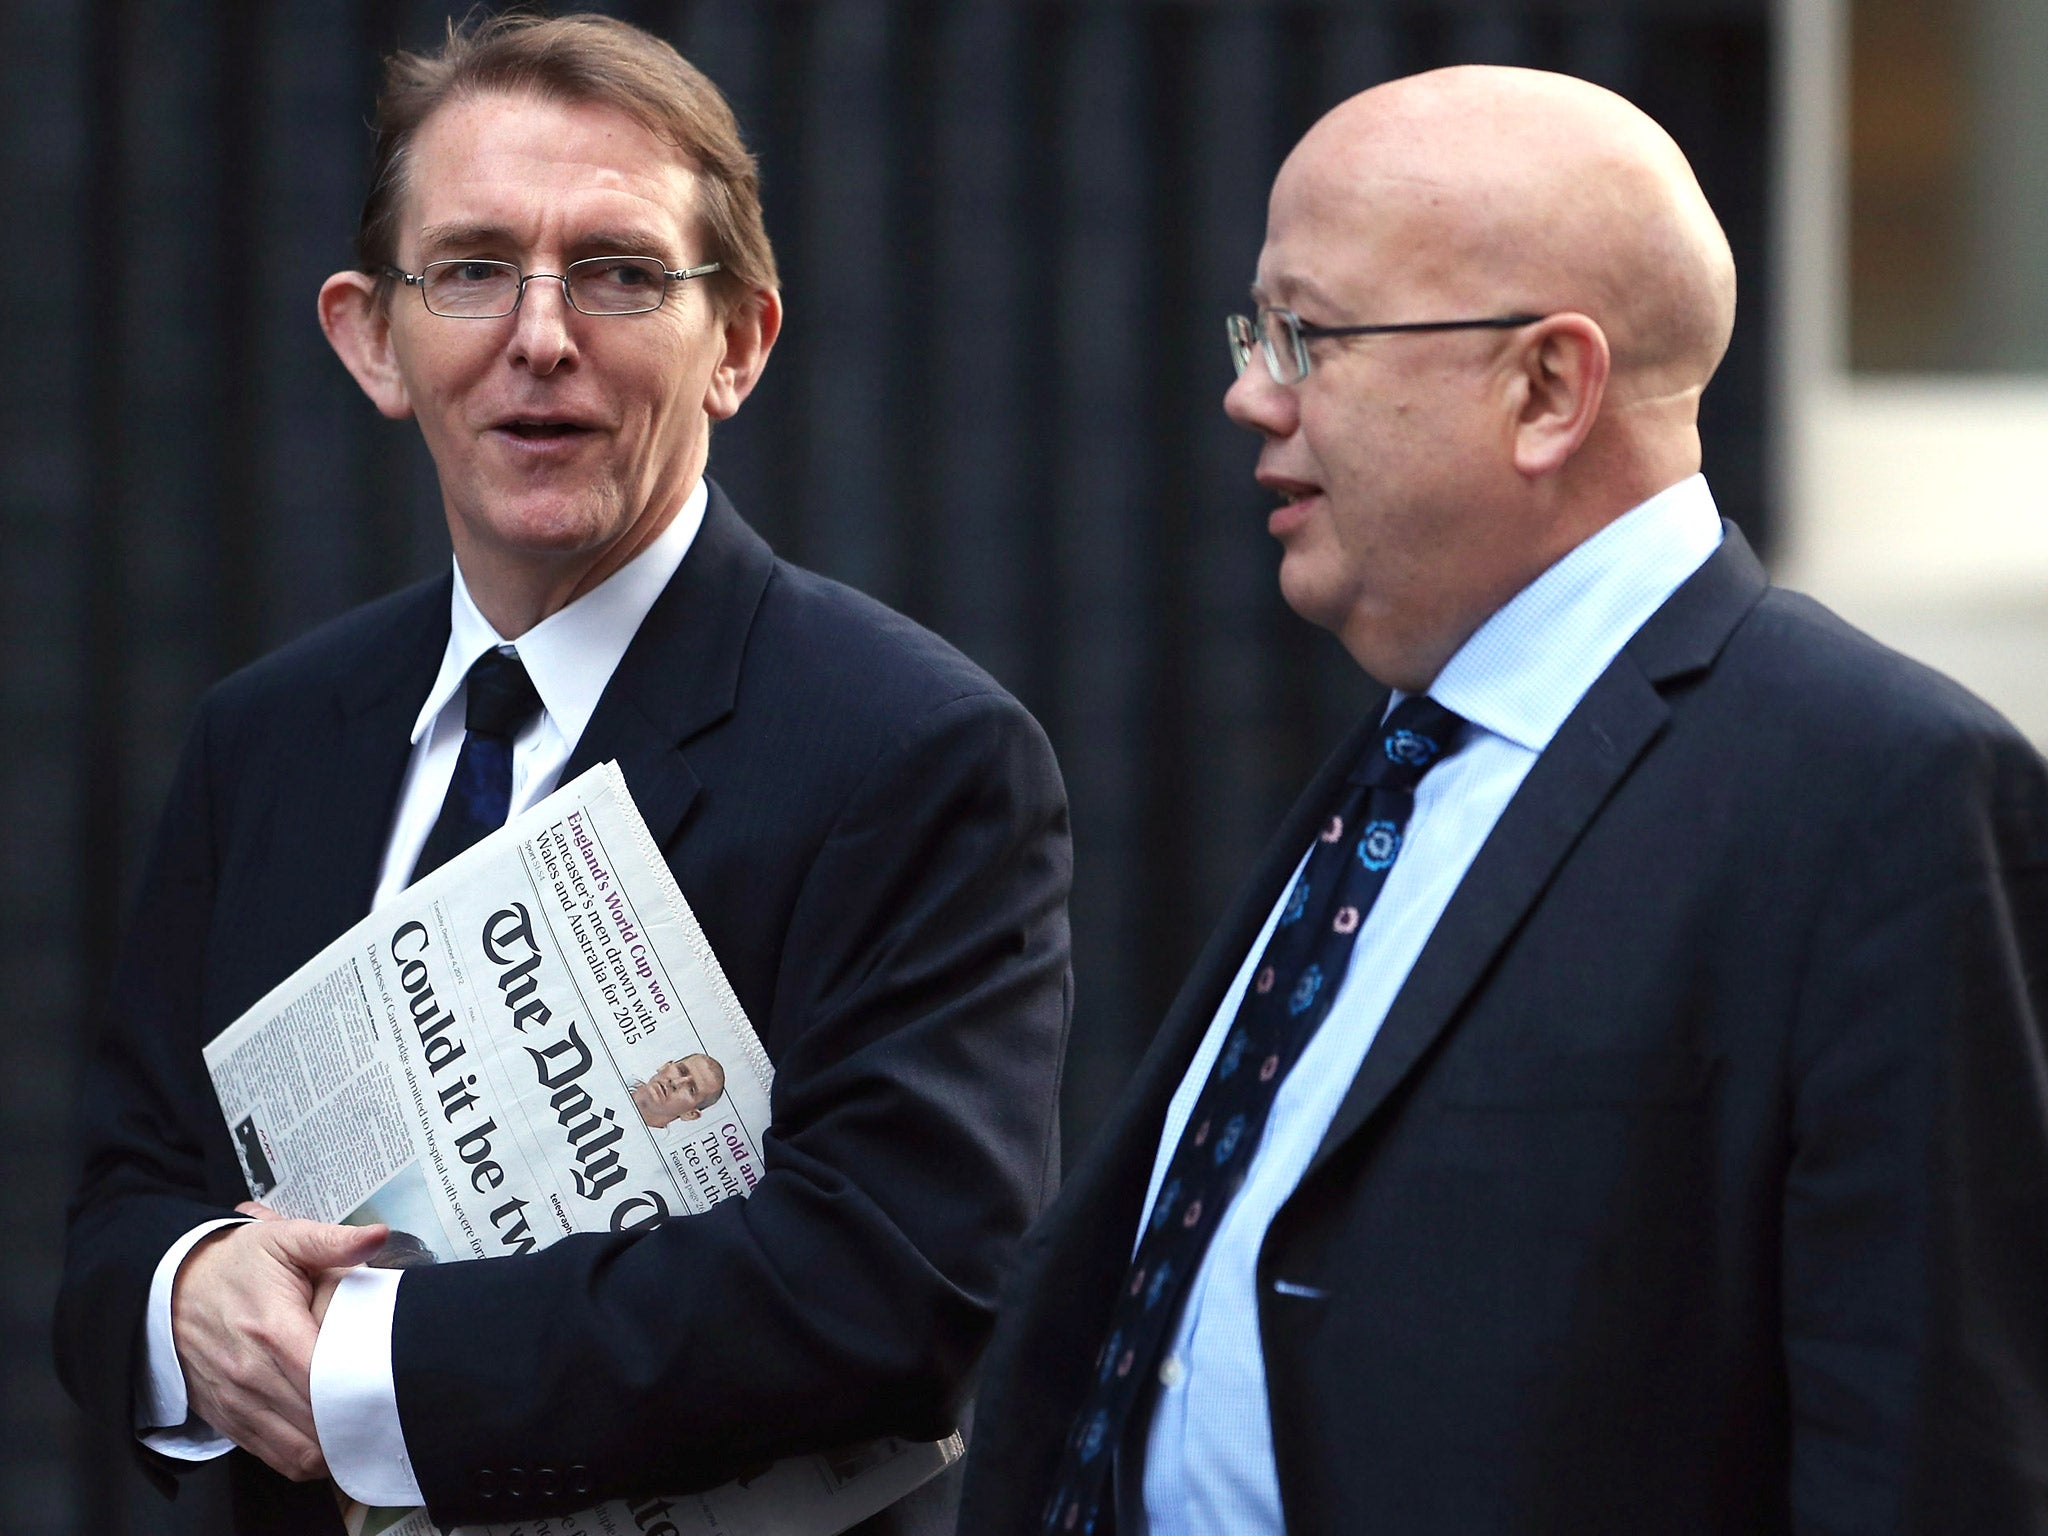 Editor of The Independent Chris Blackhurst, right, arrives for Tuesday's meeting with other newspaper editors and David Cameron alongside Telegraph editor Tony Gallagher